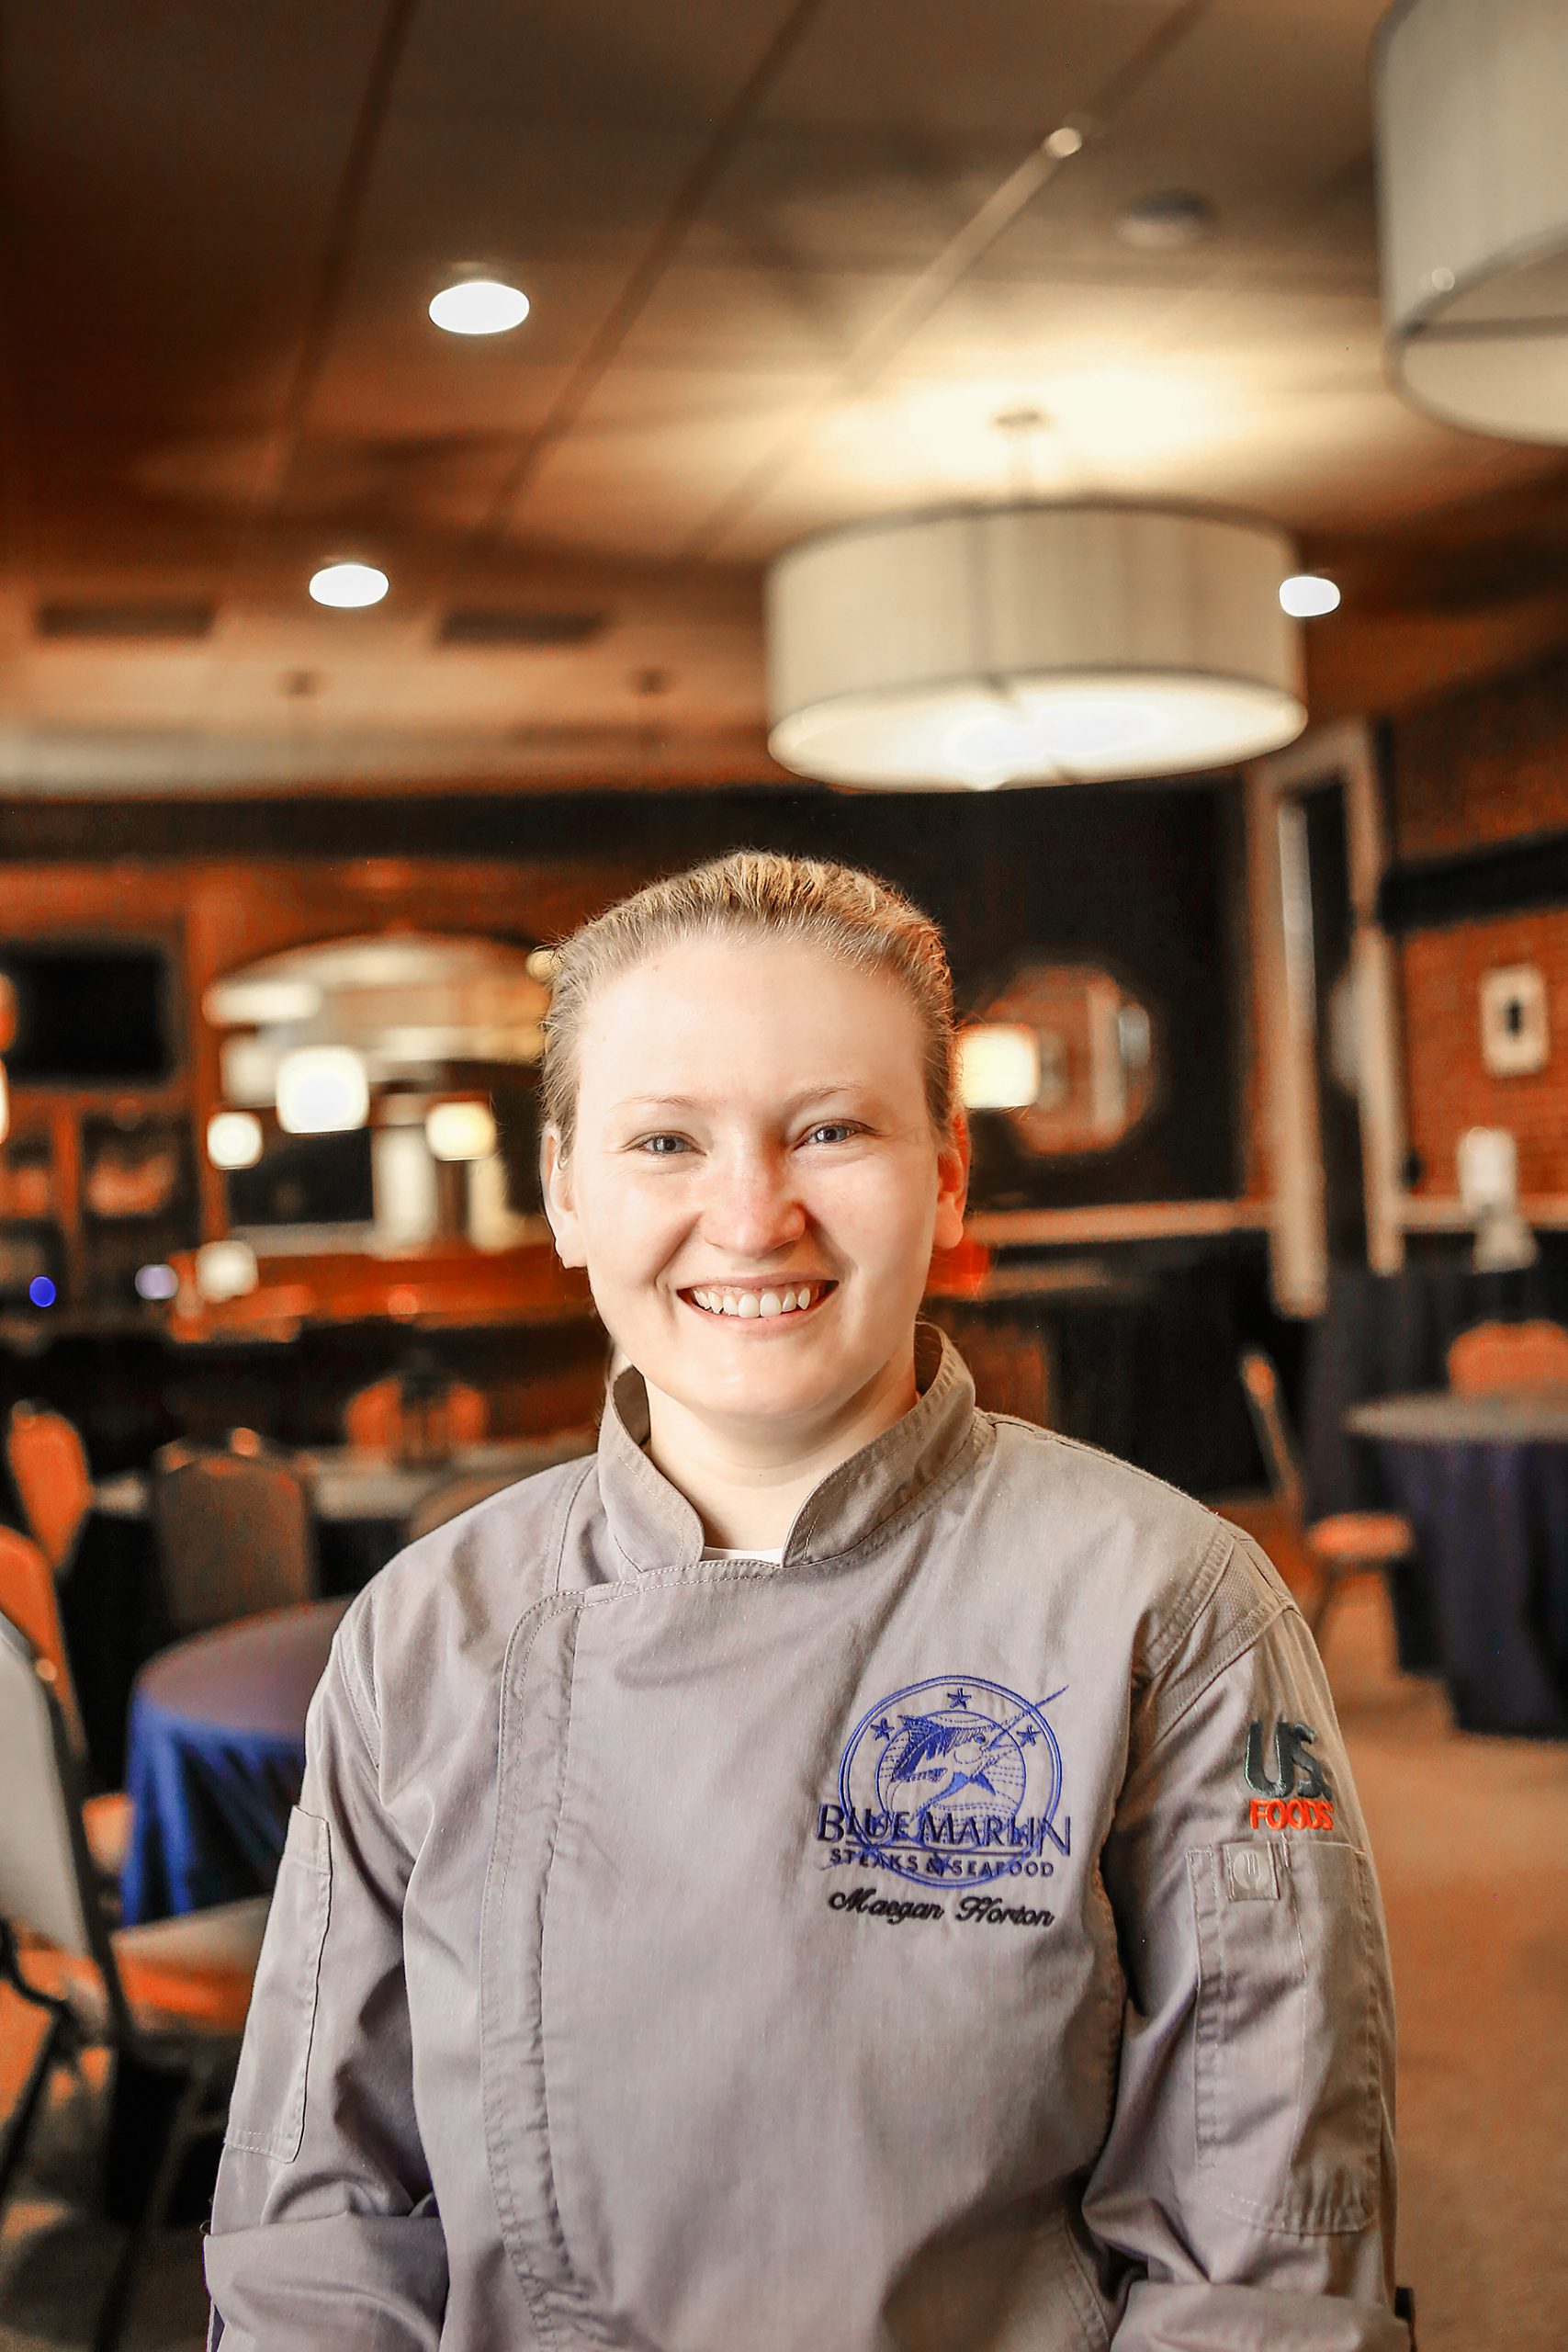 Trained at Johnson and Wales in Charlotte, Meagan has been executive chef for 9 years at Blue Marlin, a popular restaurant in Columbia’s Vista district. 